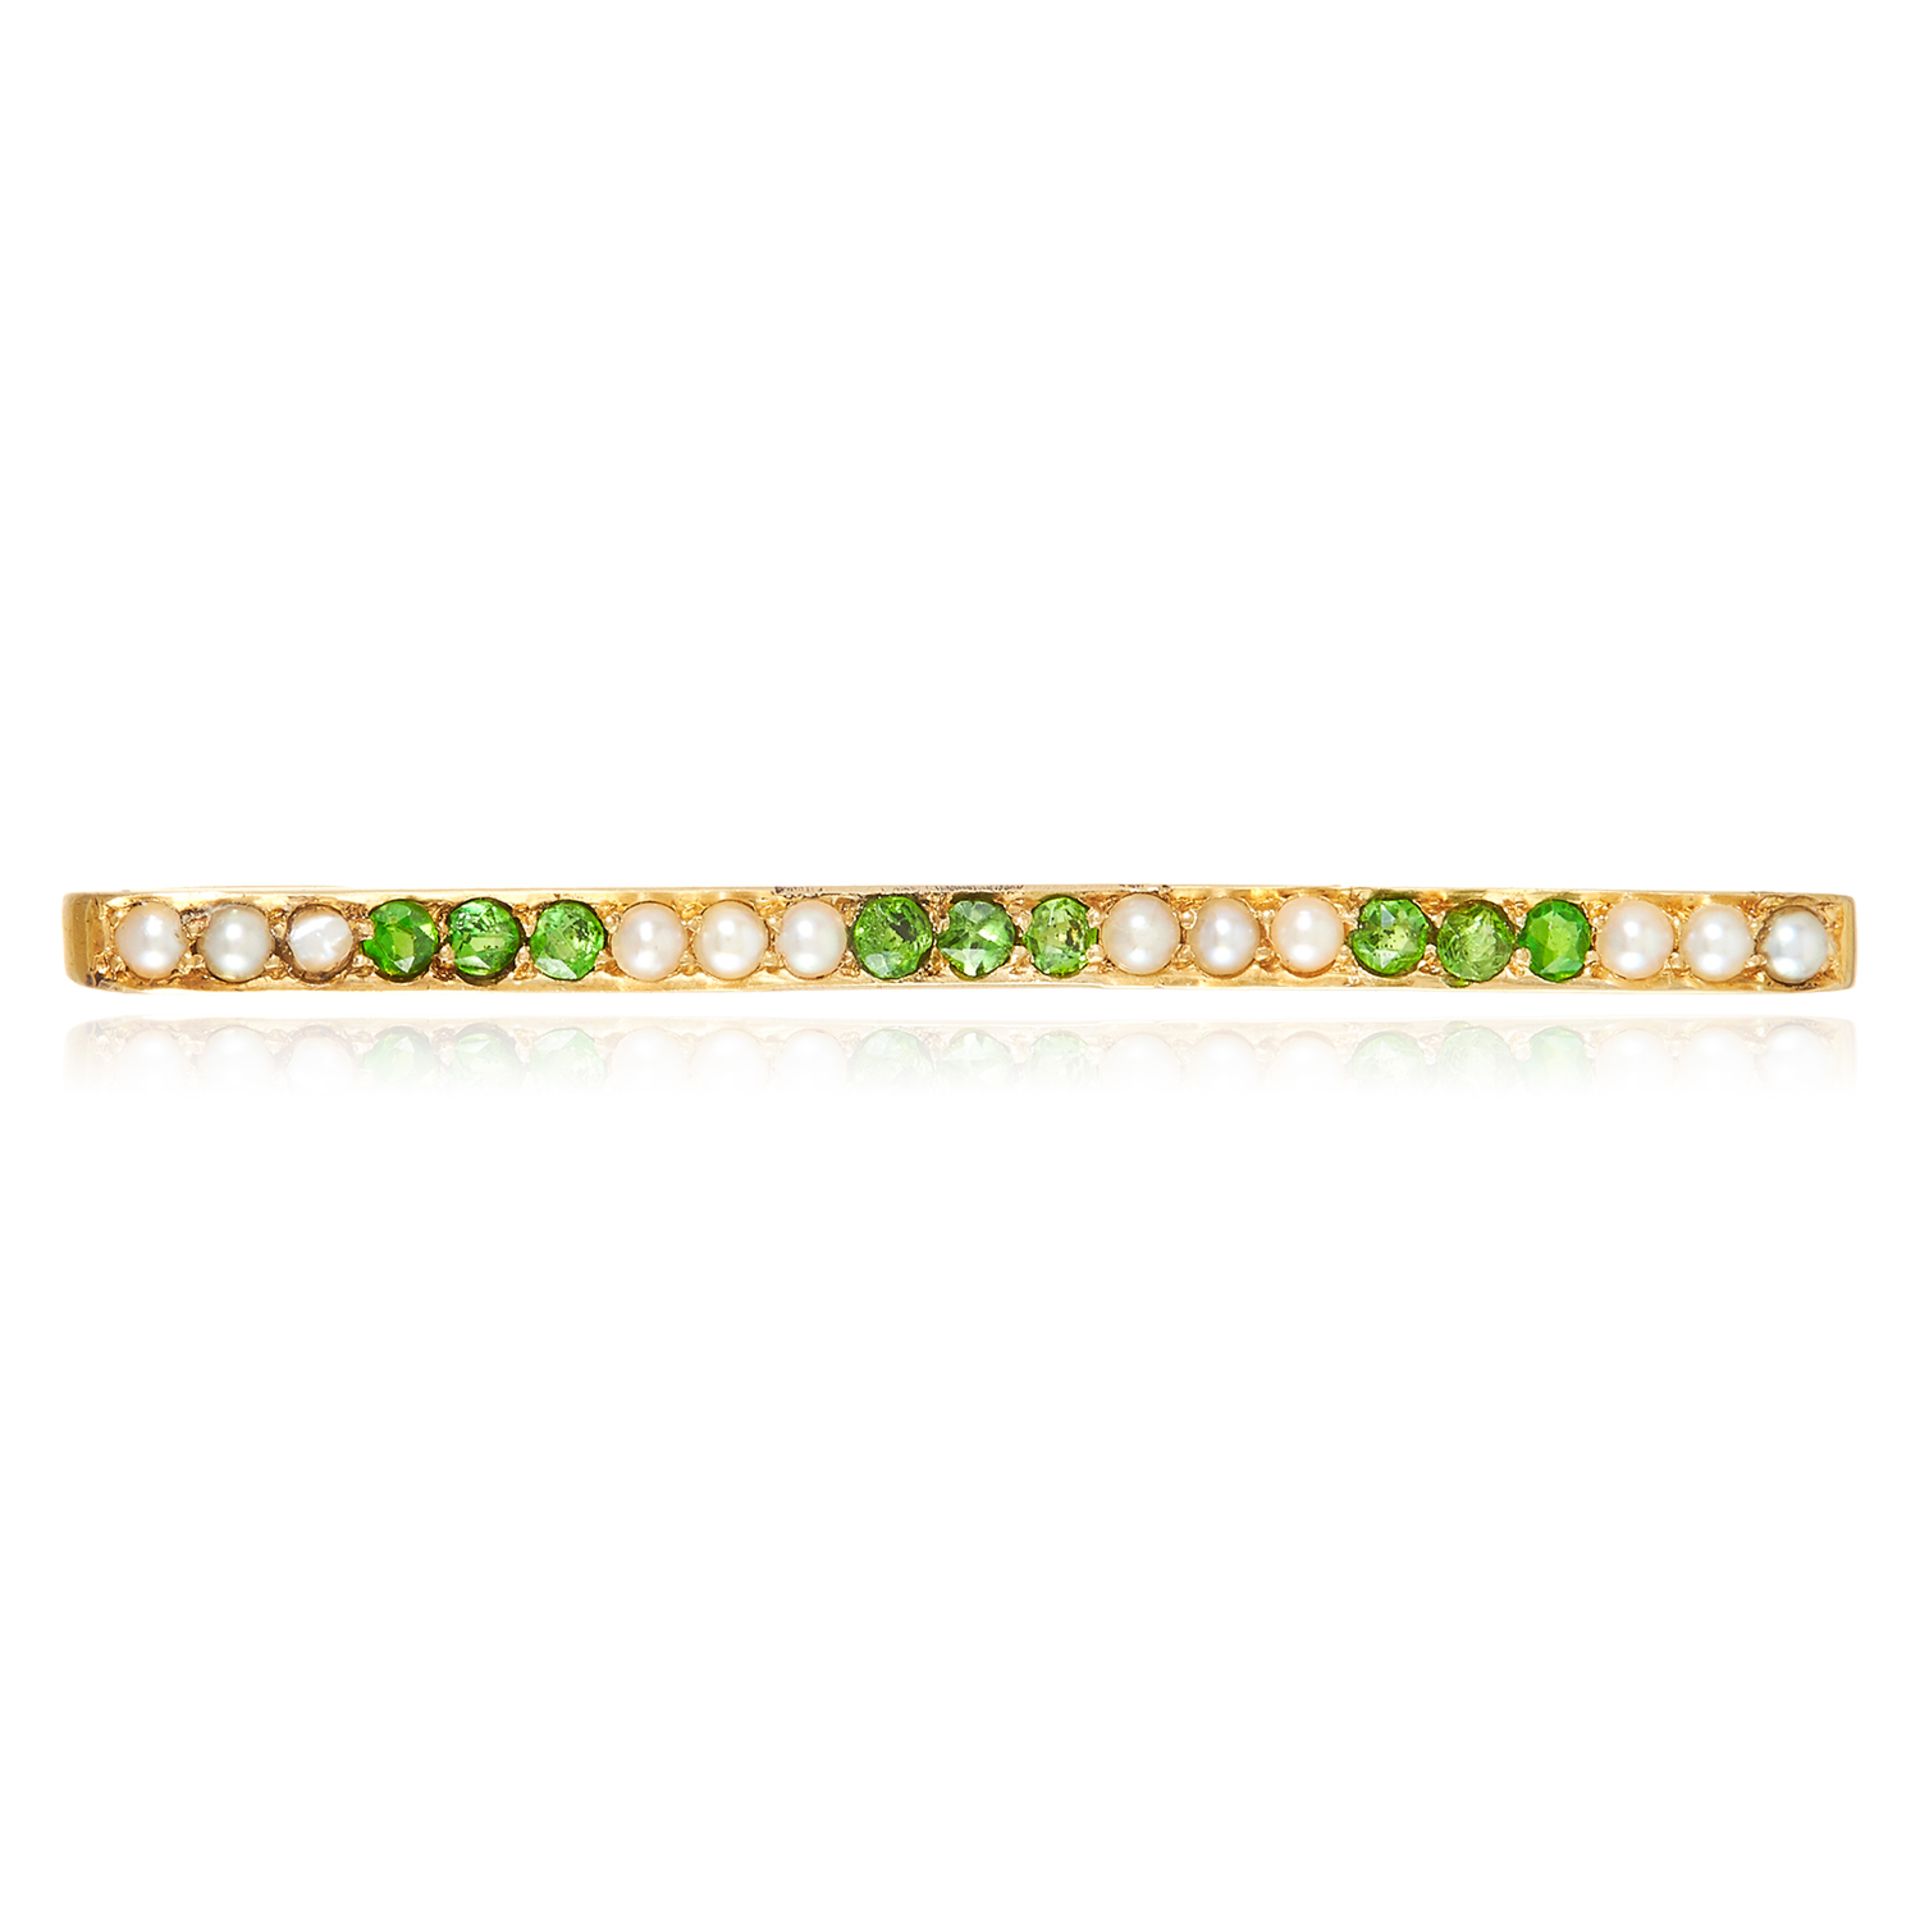 A PEARL AND PERIDOT BAR BROOCH in high carat yellow gold, set with alternating round cut peridot and